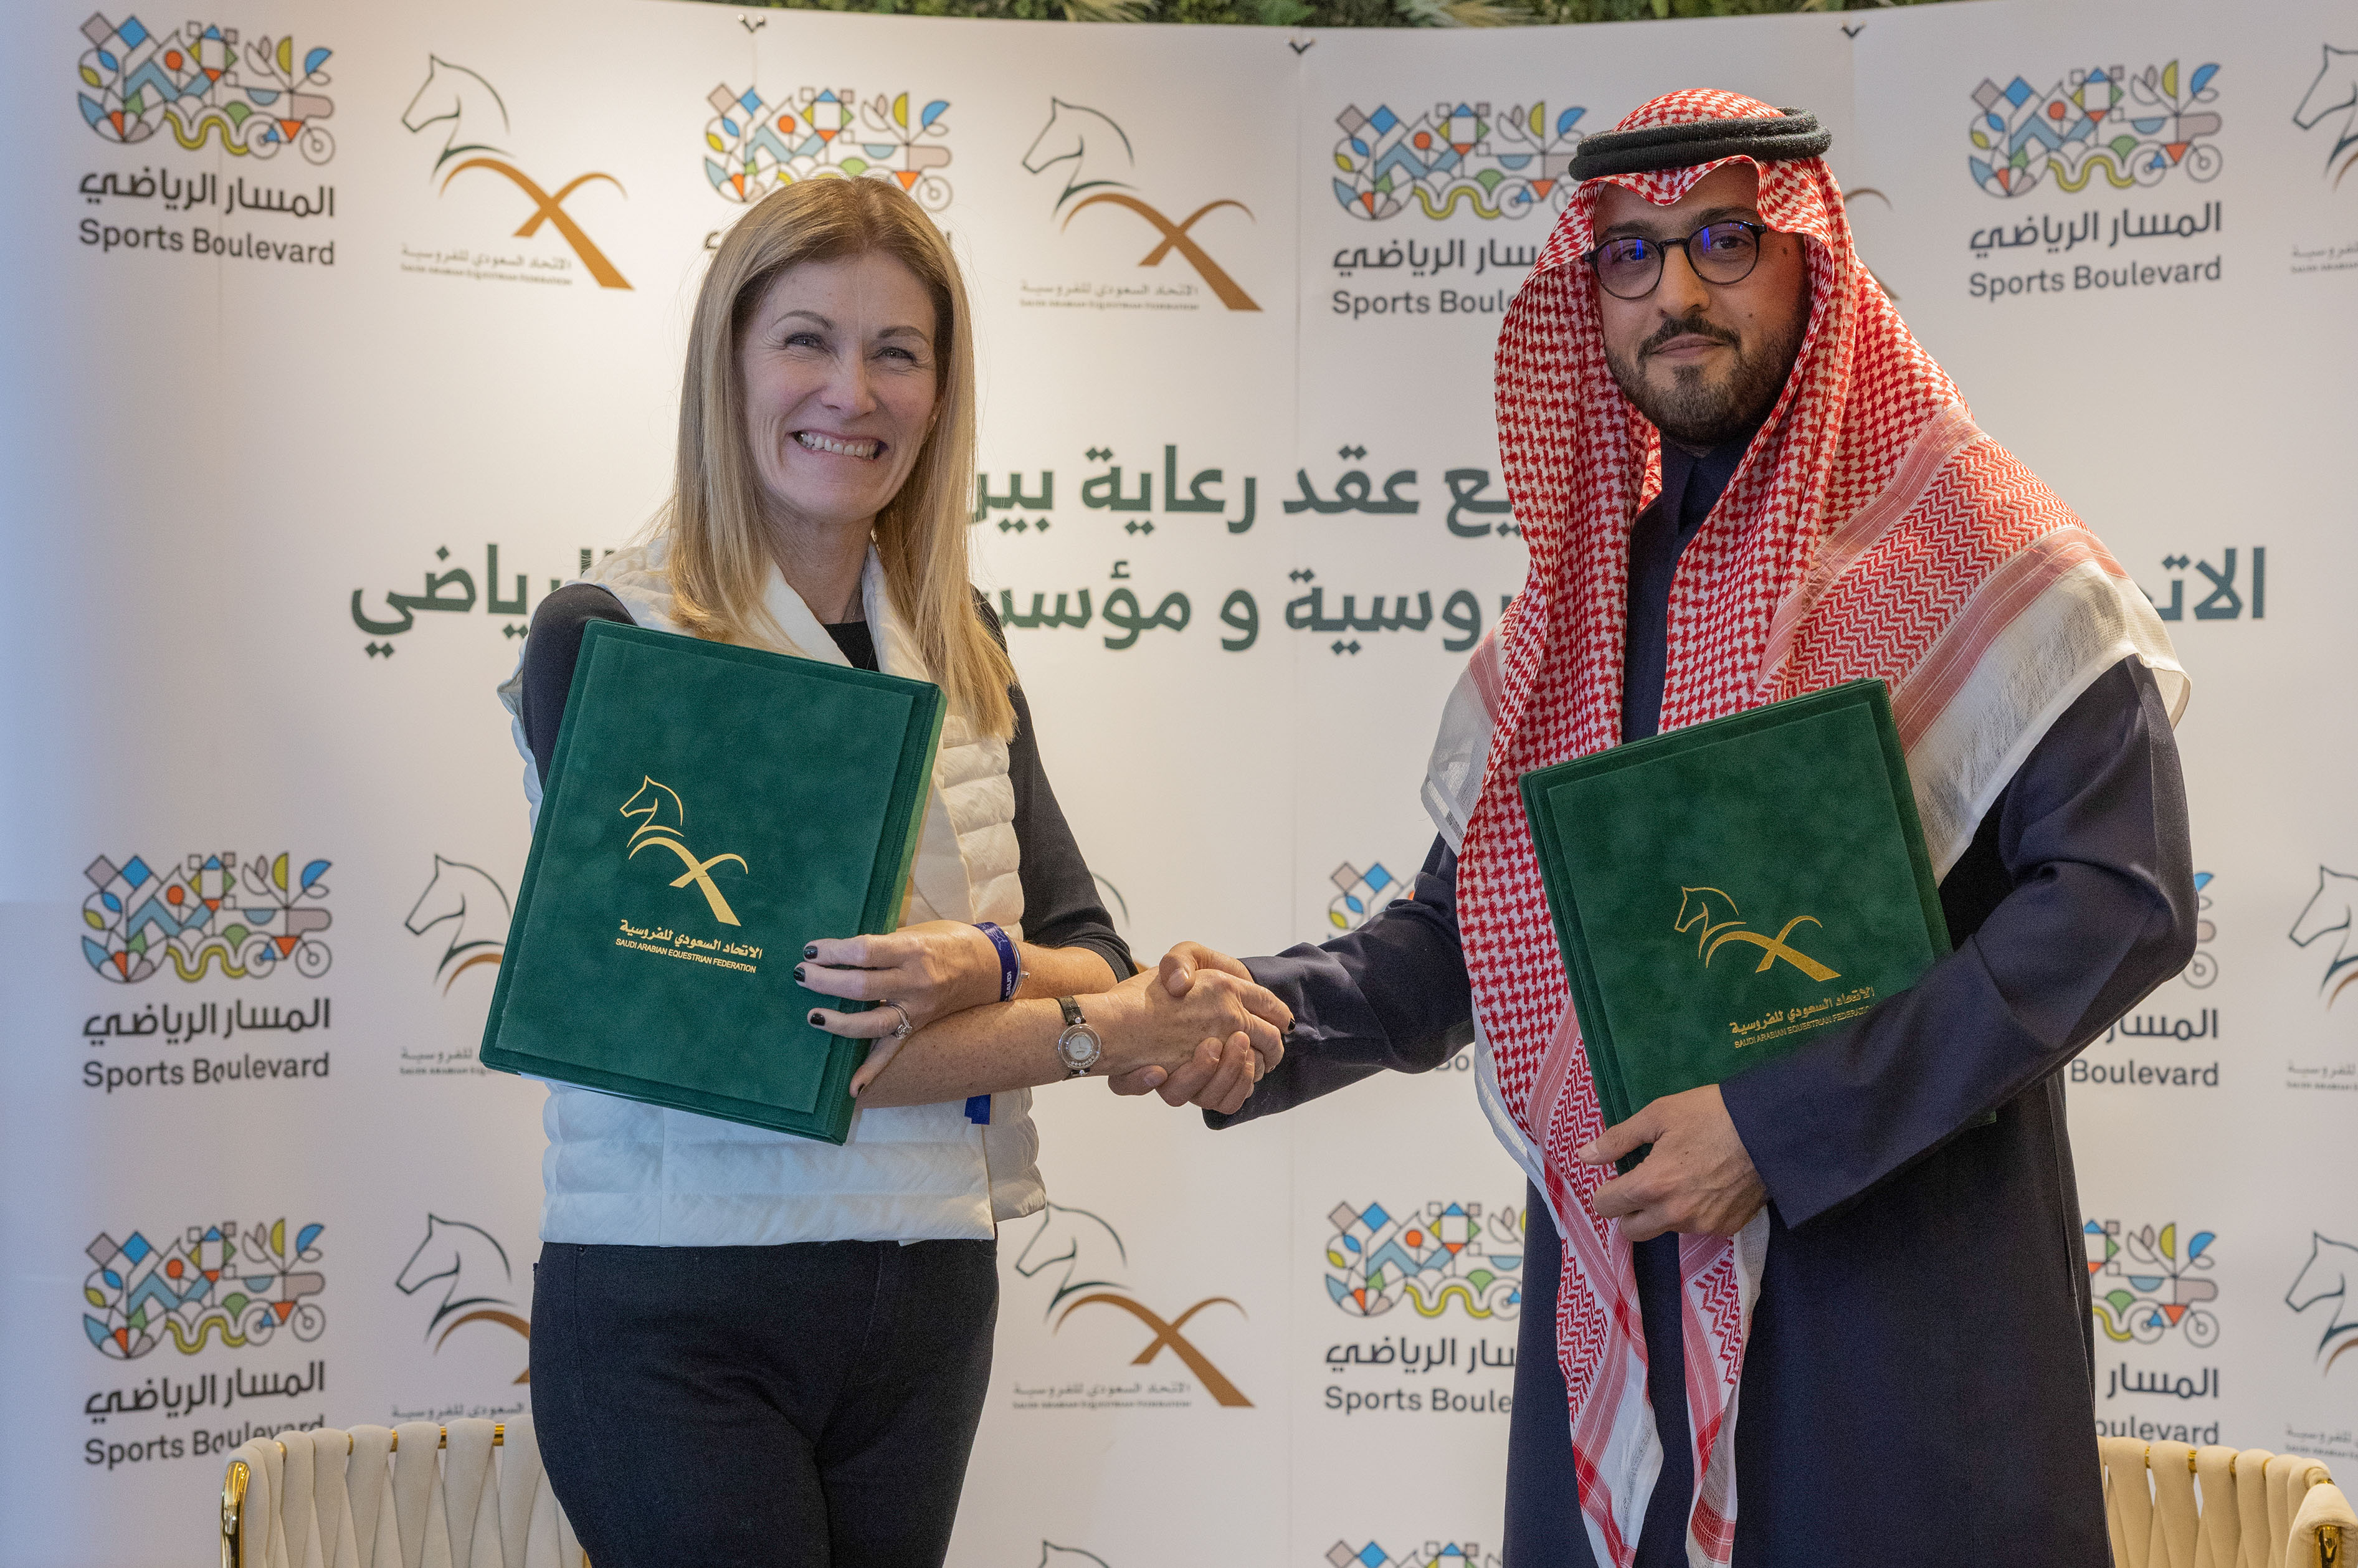 Sports Boulevard Foundation and Saudi Arabian Equestrian Federation signed an agreement, making the Sports Boulevard an official sports partner 